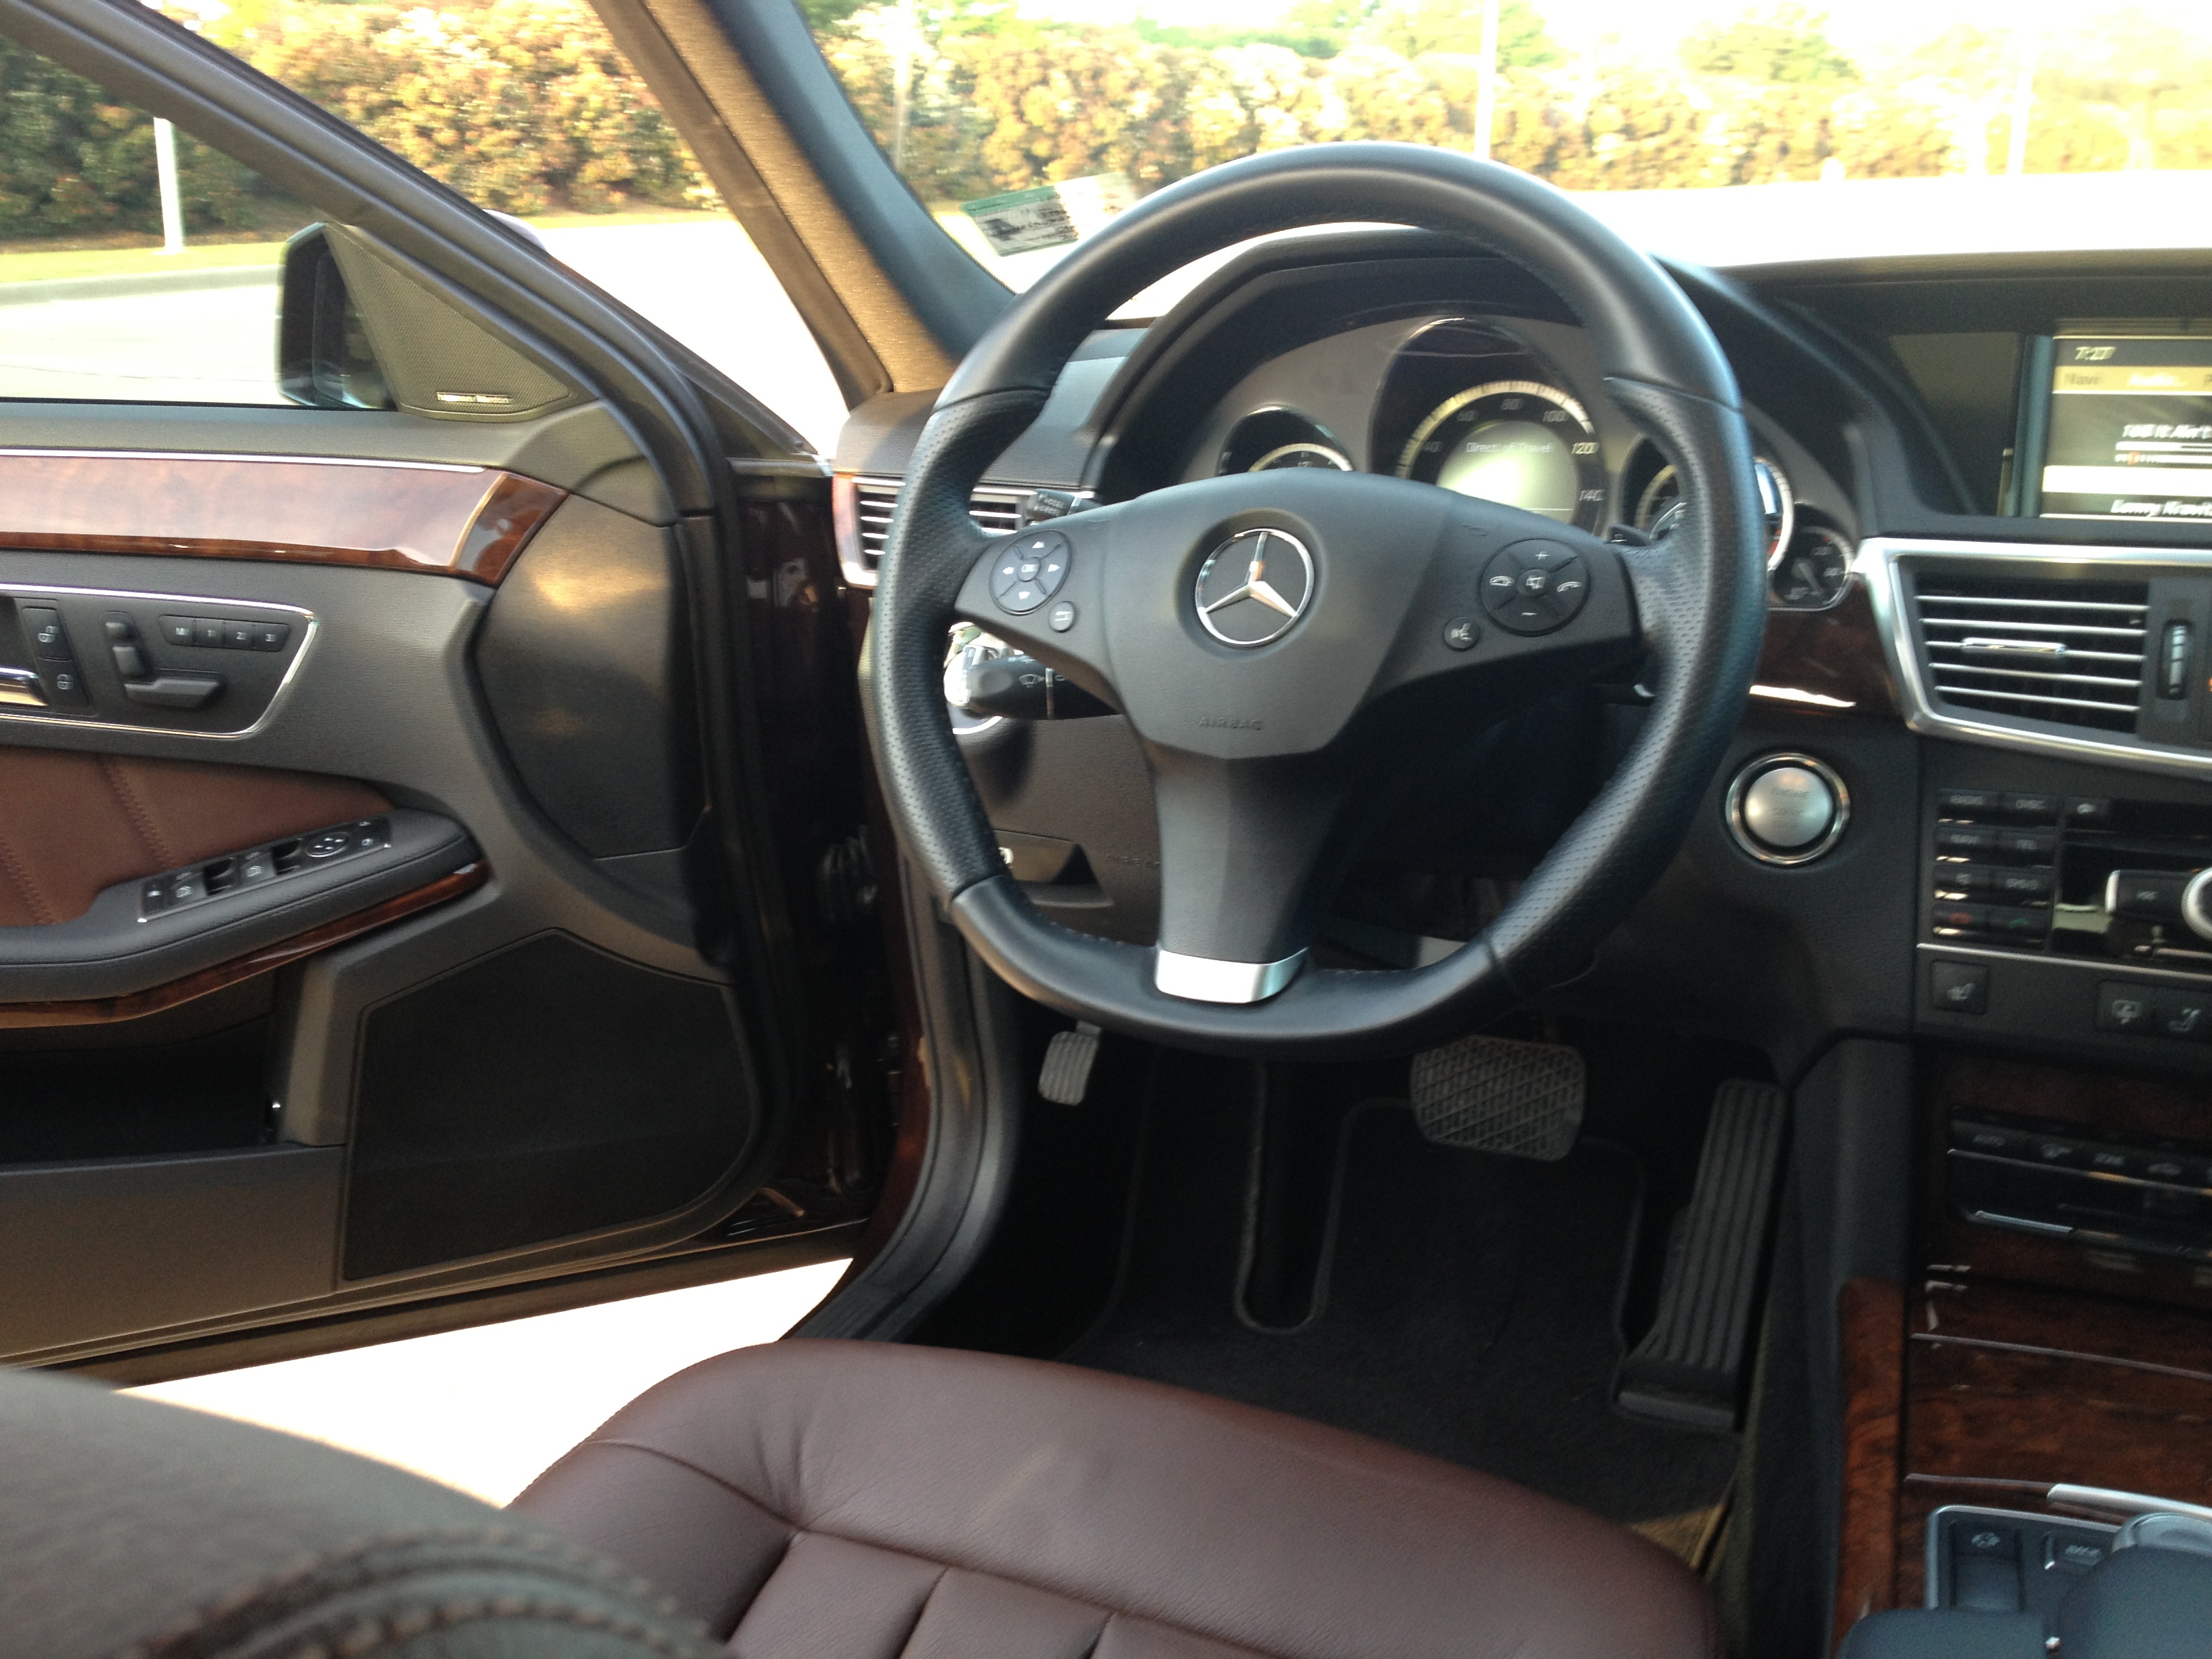 Thoughts On Chestnut Interior Mbworld Org Forums